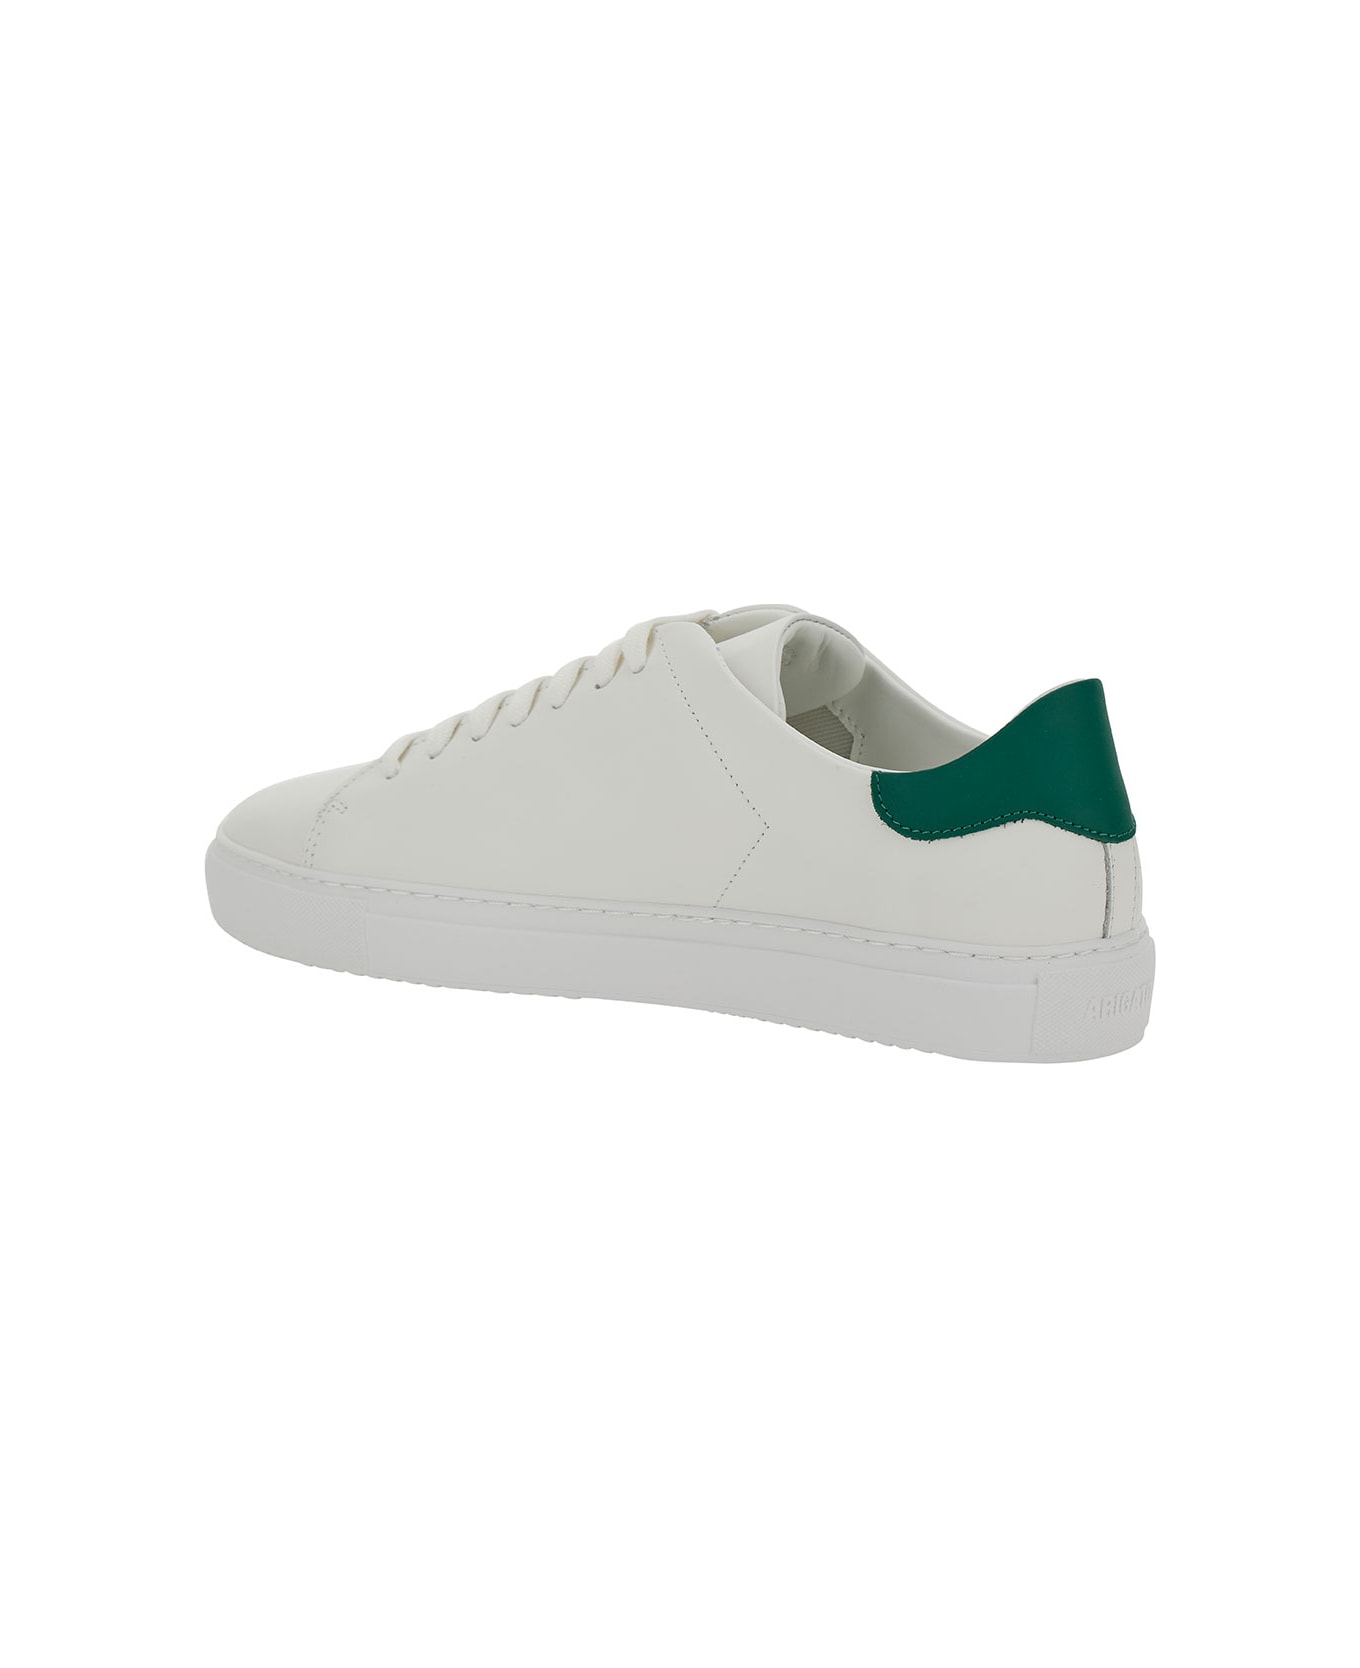 Axel Arigato 'clean 90' White Low Top Sneakers With Laminated Logo In Leather Man - White Green スニーカー